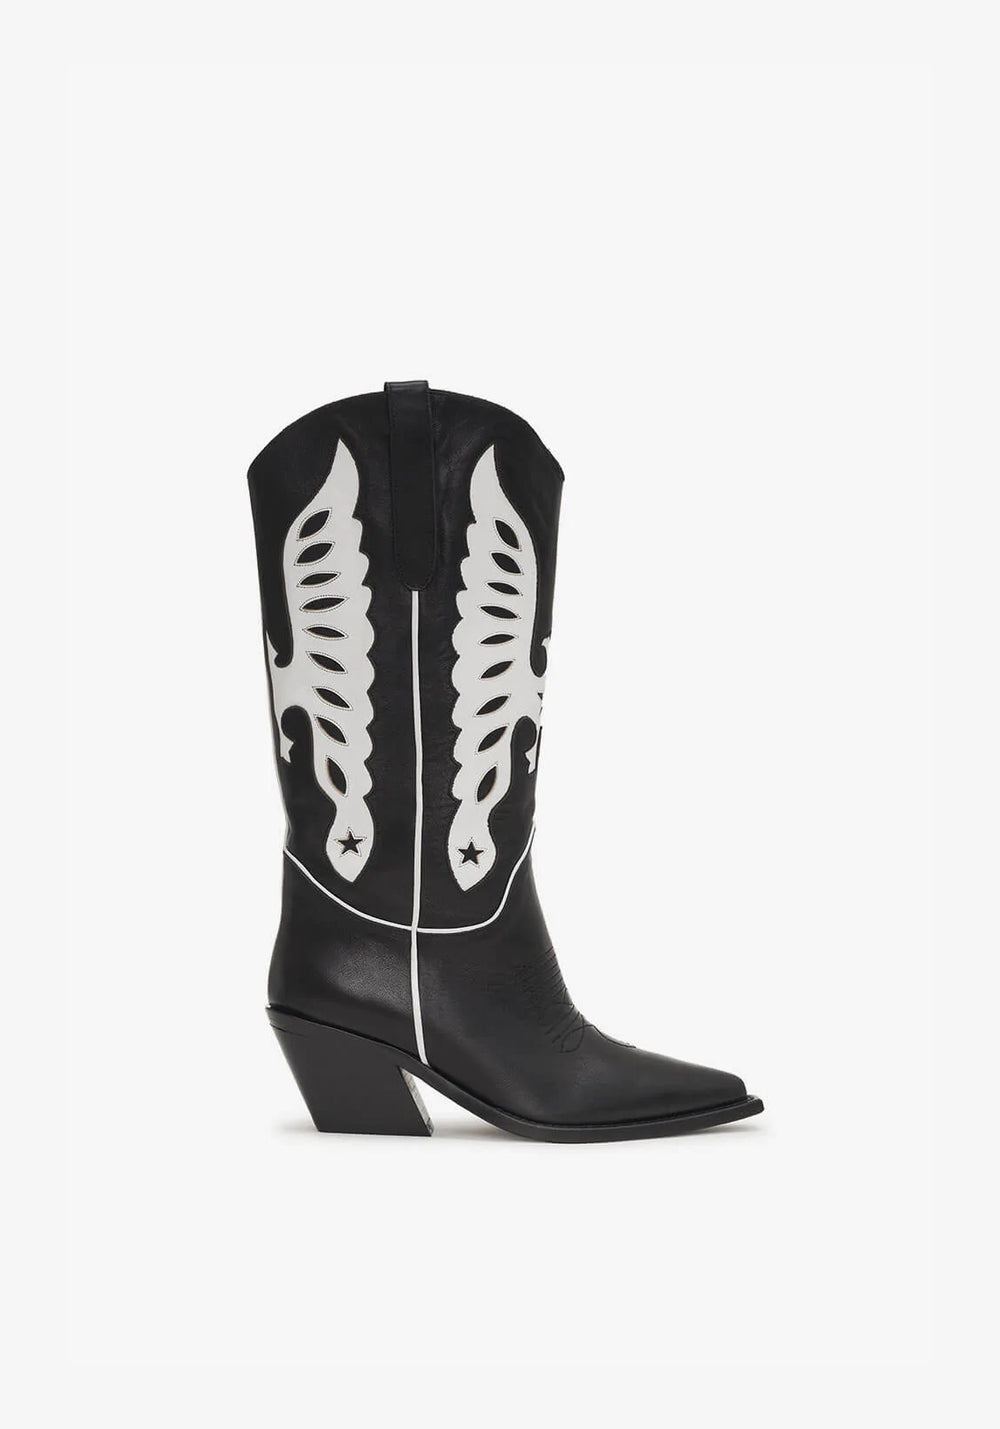 MID CALF TANIA BOOTS BLACK AND WHITE